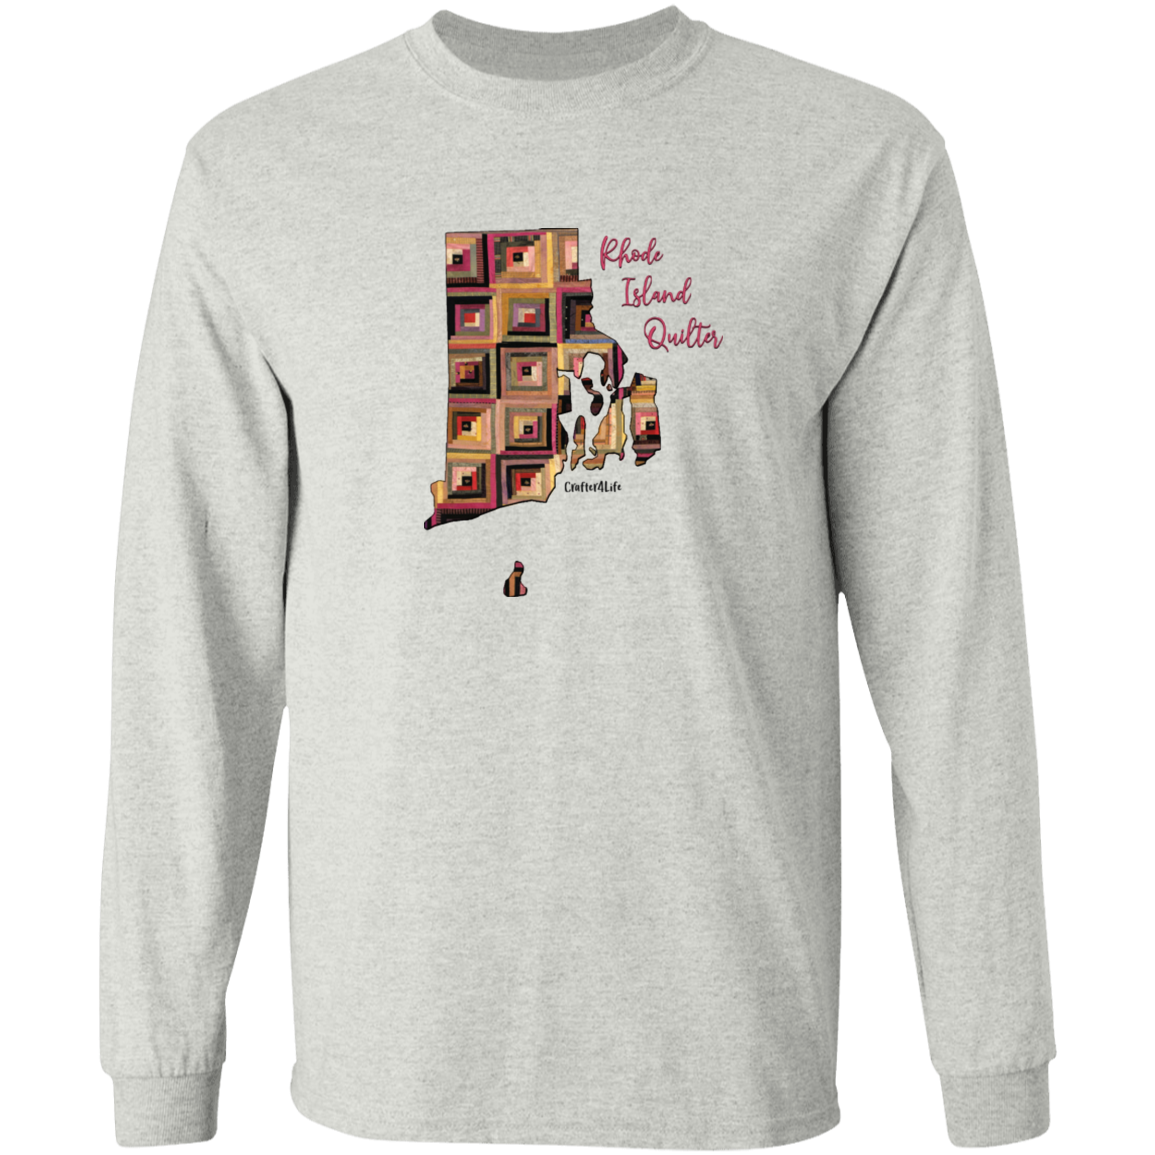 Rhode Island Quilter Long Sleeve T-Shirt, Gift for Quilting Friends and Family